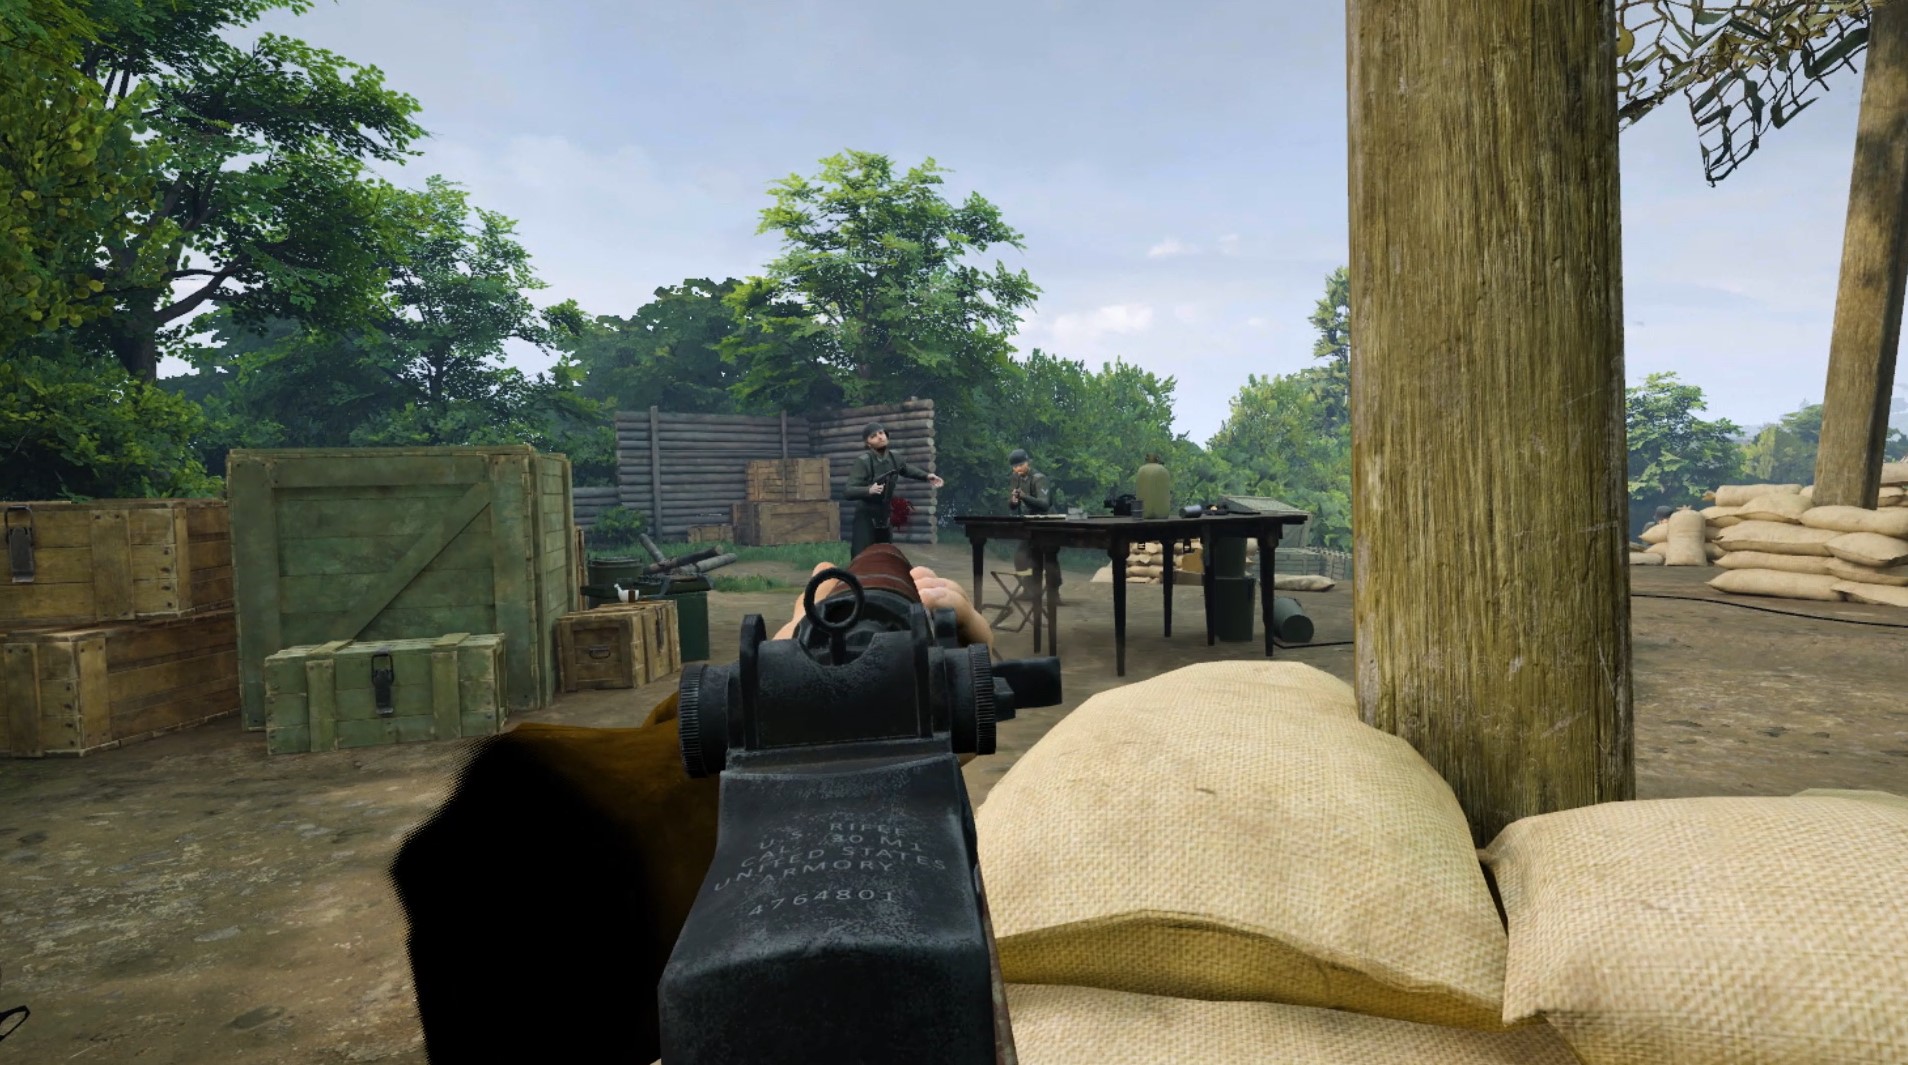 medal of honor vr aim down sights respawn